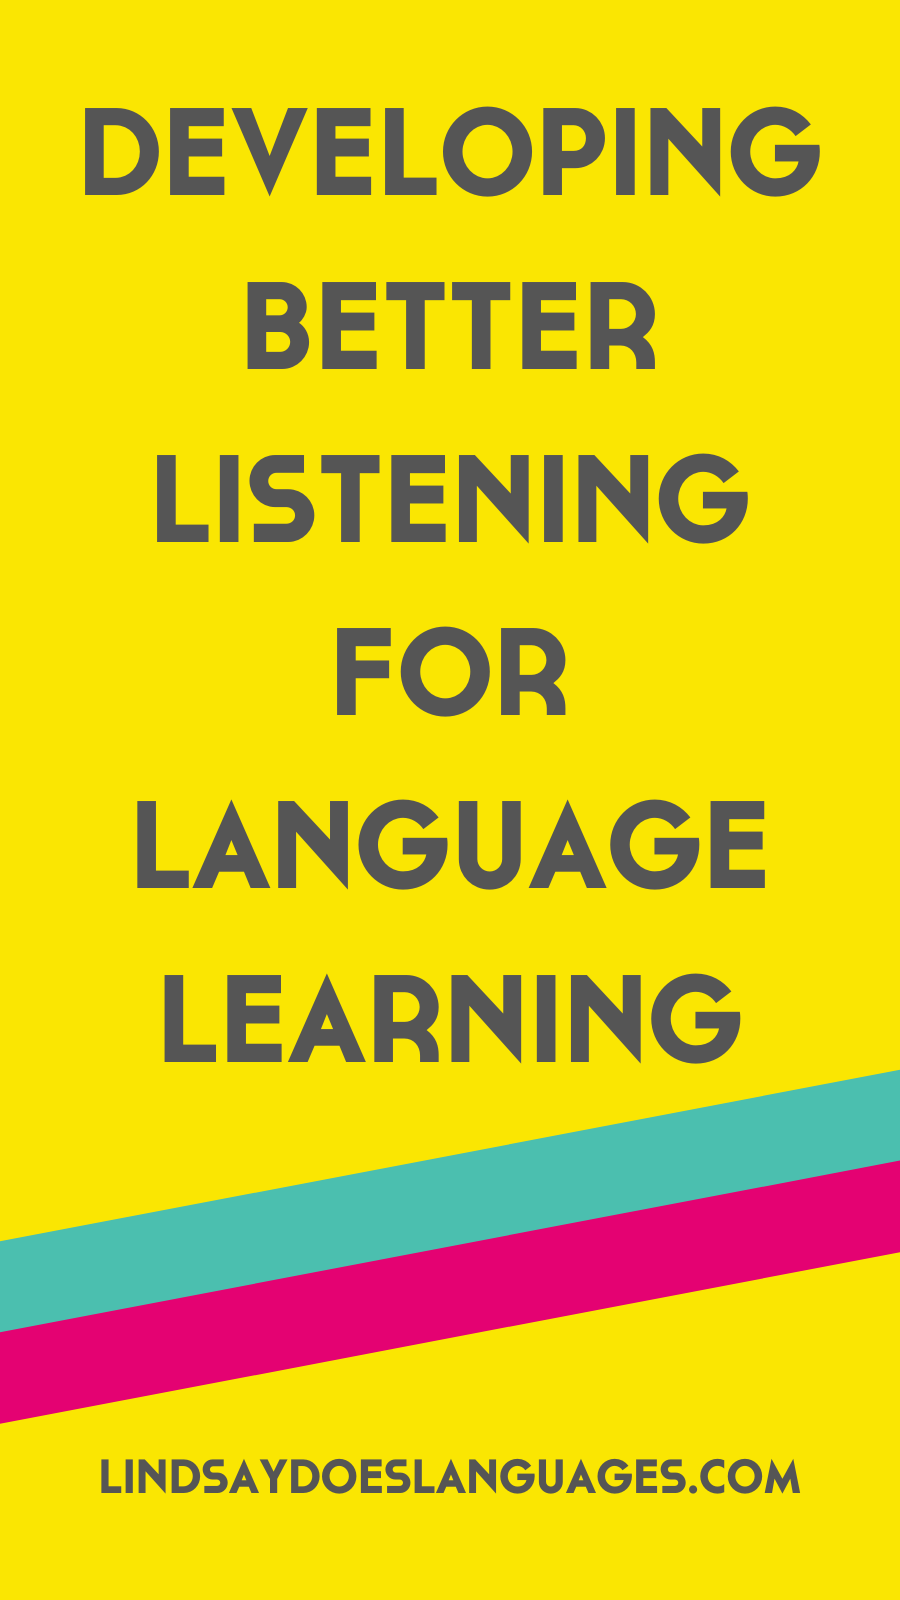 Developing better listening skills may not be top of your language list. Here's why it should be and how you can do it.